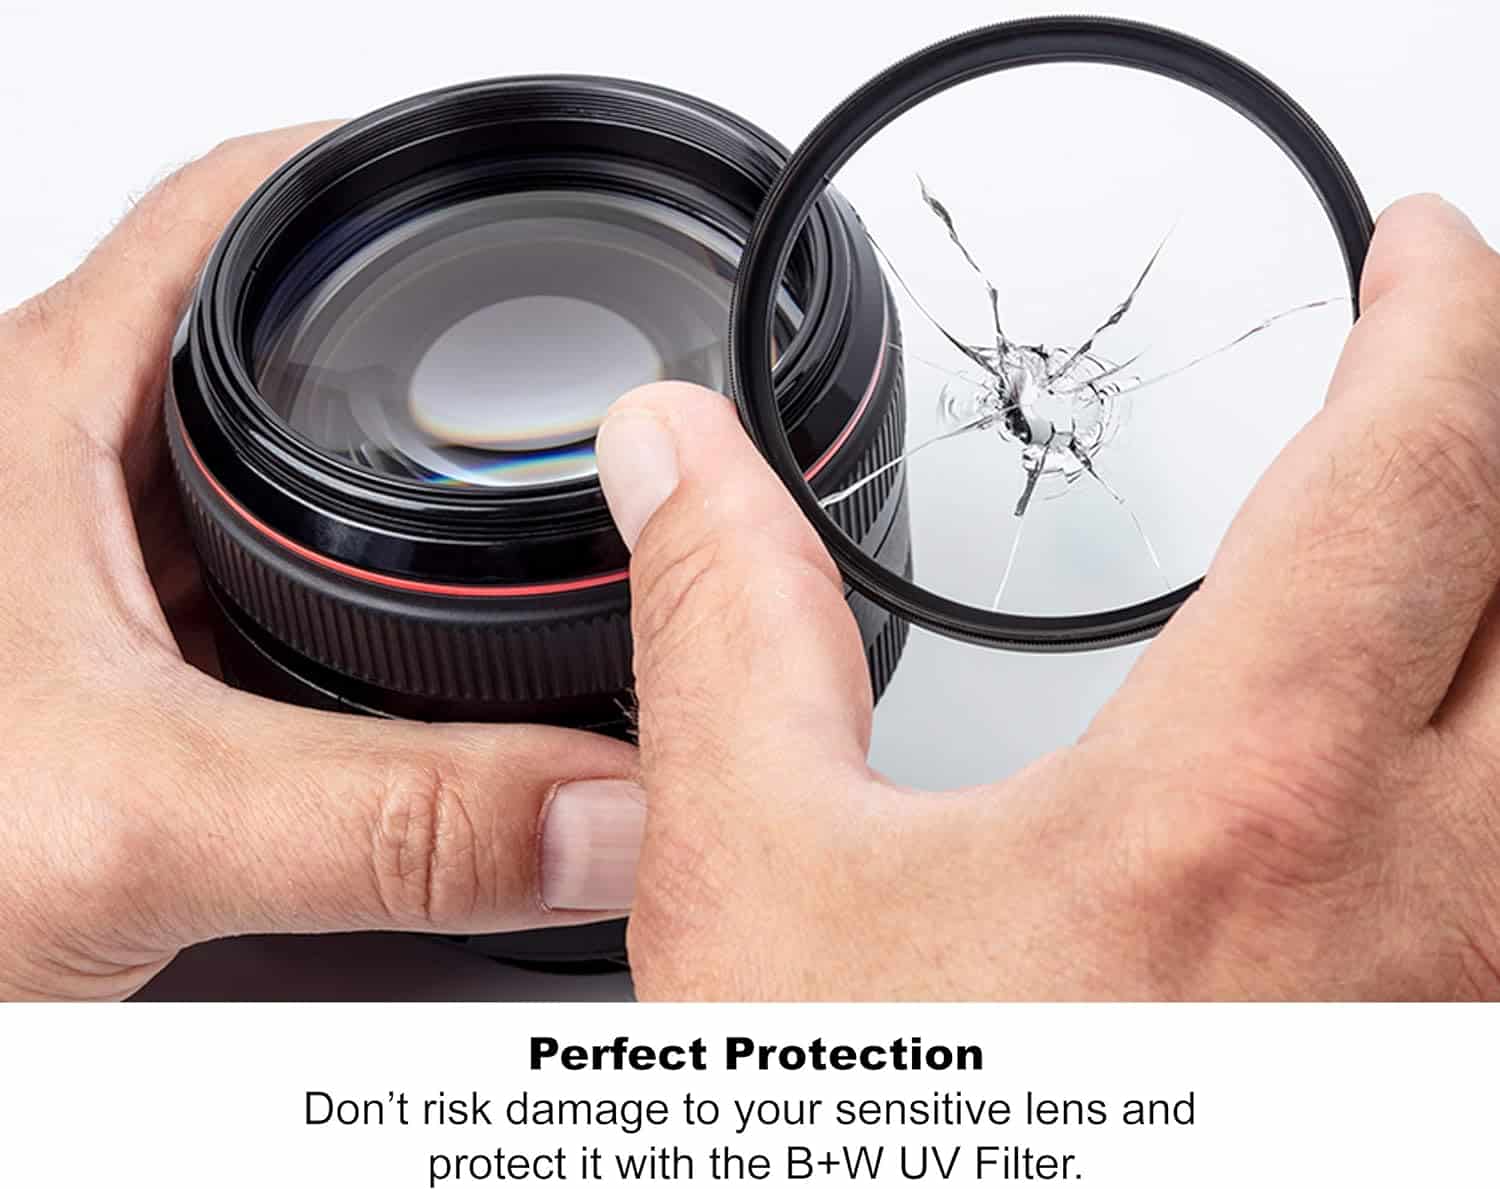 B + W 52mm UV Protection Filter (010) Review - Protect Your Precious Camera Lenses